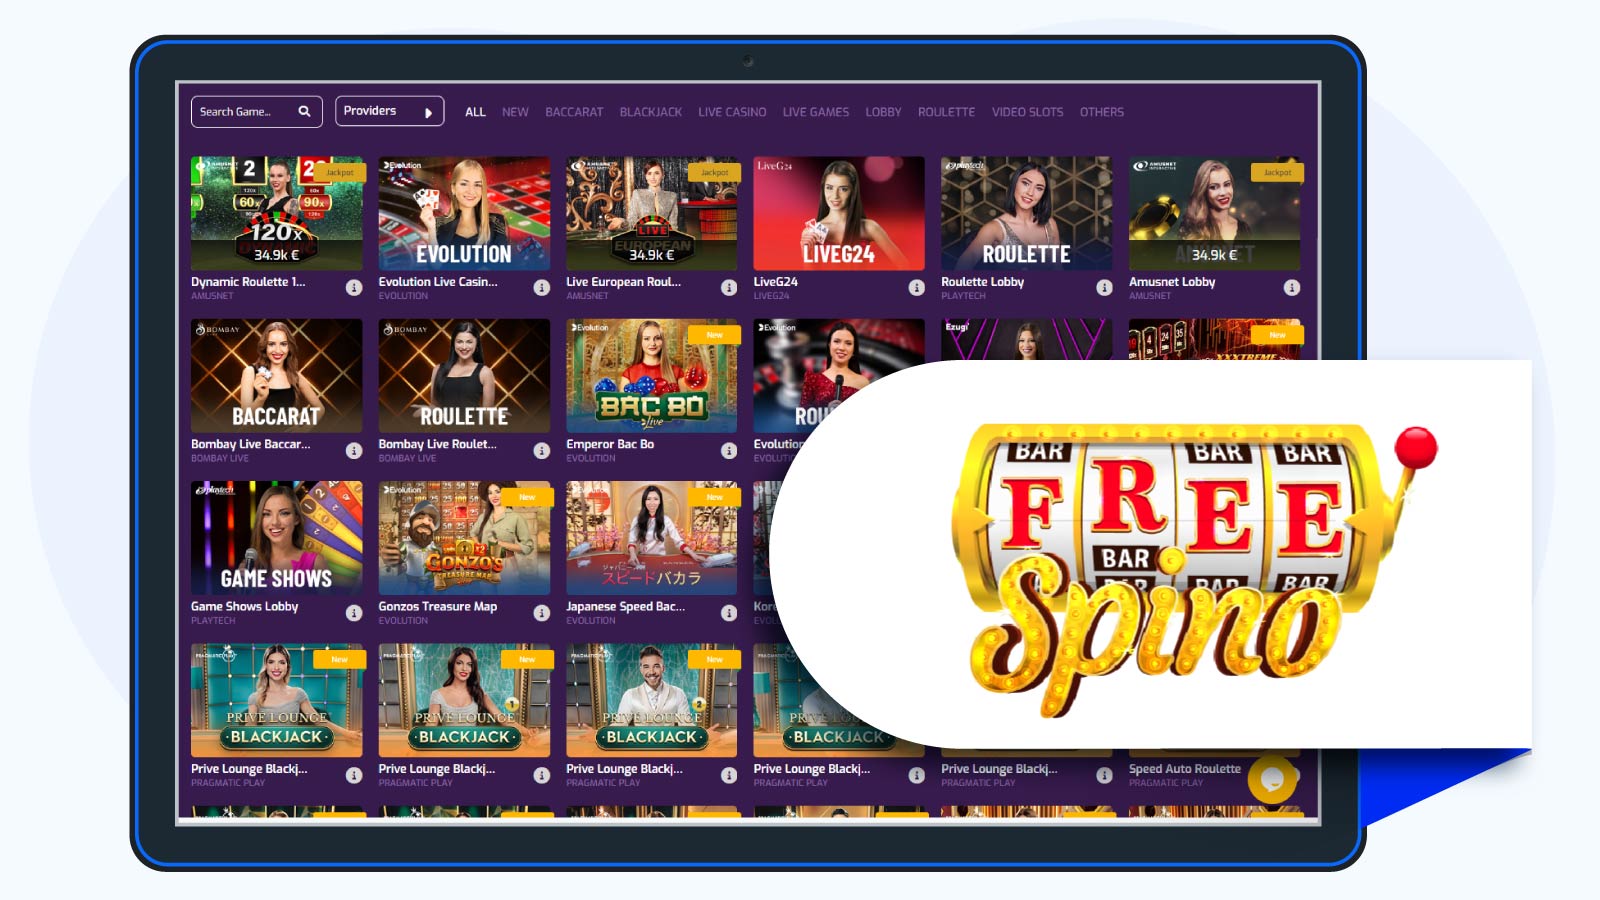 FreeSpino Casino Biggest Live Game Collection